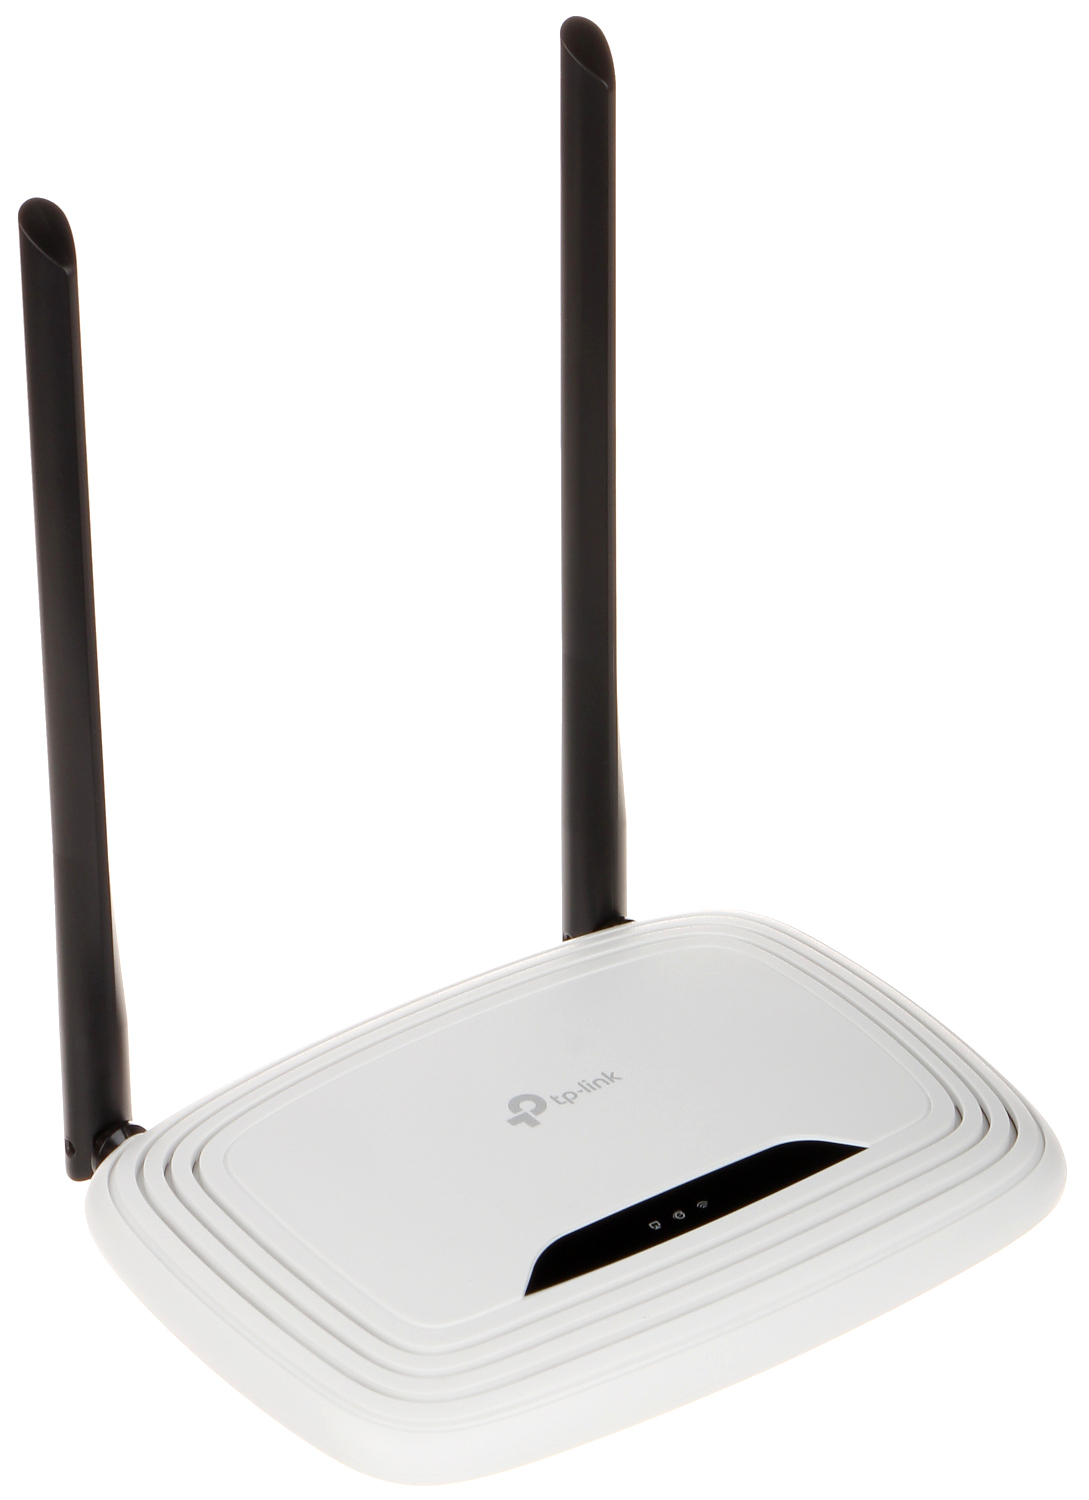 outer conspiracy Circus ROUTER TL-WR841N 300 Mbps TP-LINK - Internal - Delta